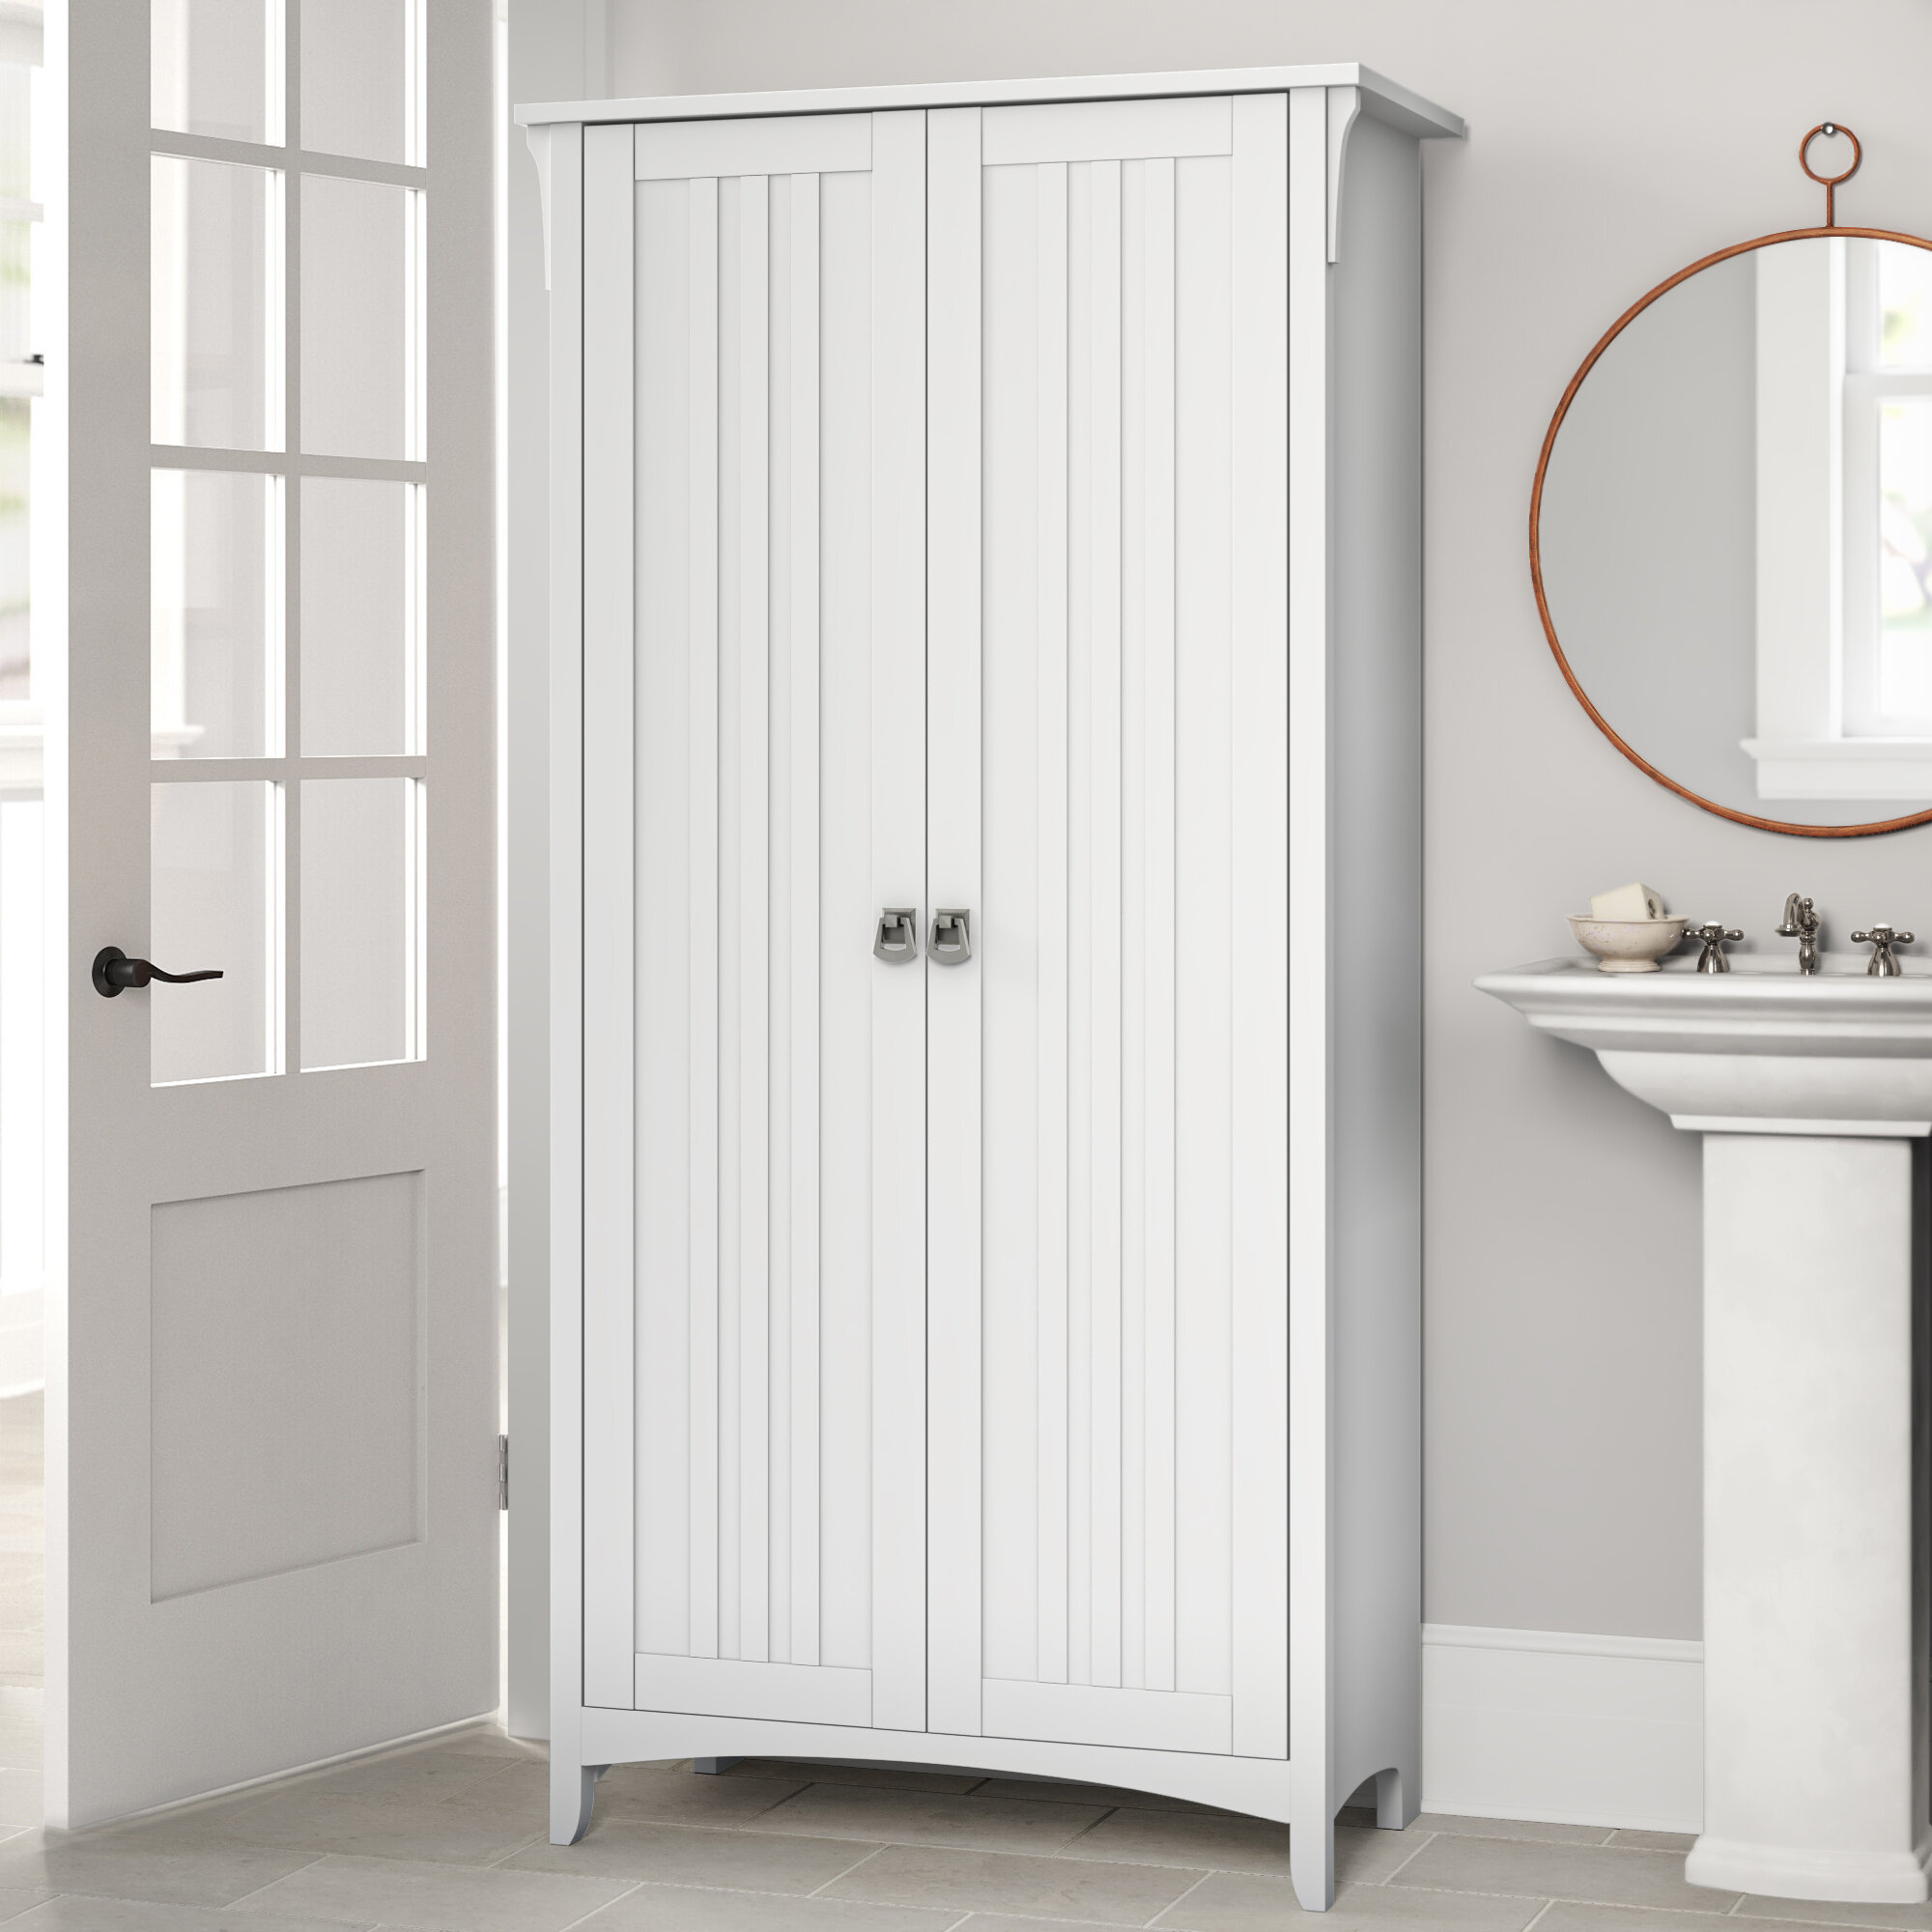 Pernell 31 W x 63 H x 16 D Free-Standing Bathroom Cabinet Lark Manor Finish: Pure White